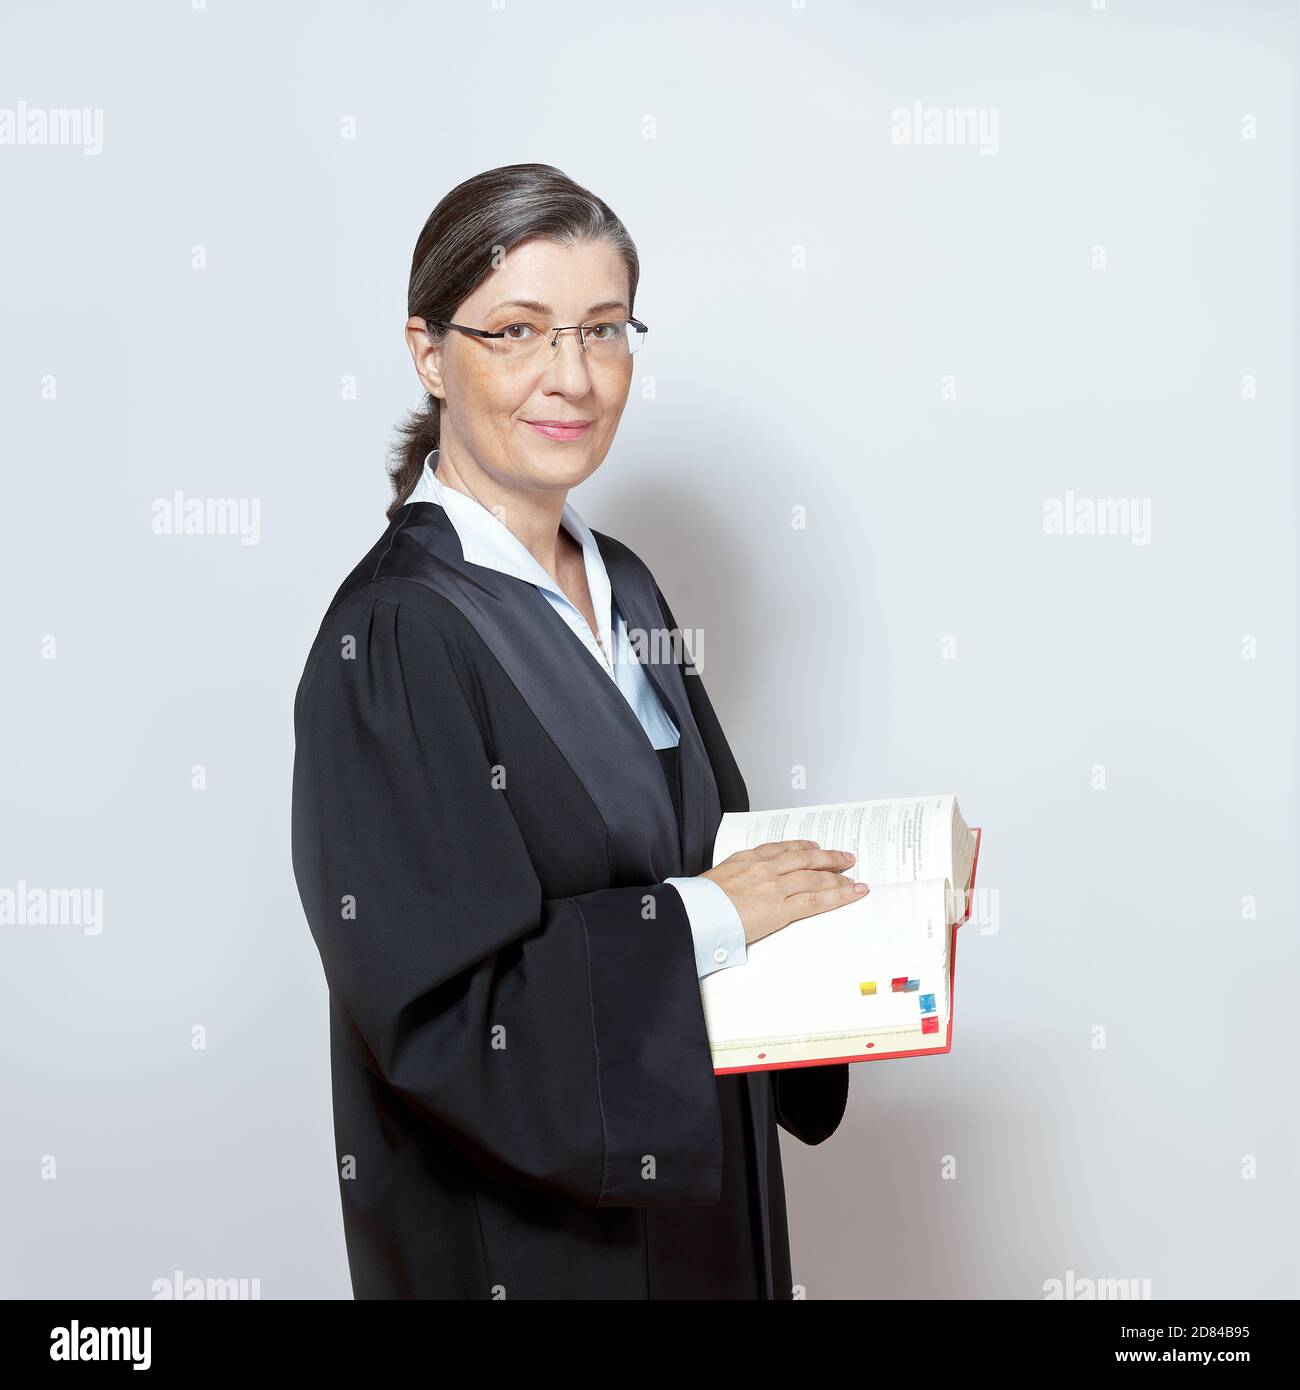 Female lawyer concept: portrait of an middle aged woman in a black gown holding a legislative text book. Stock Photo